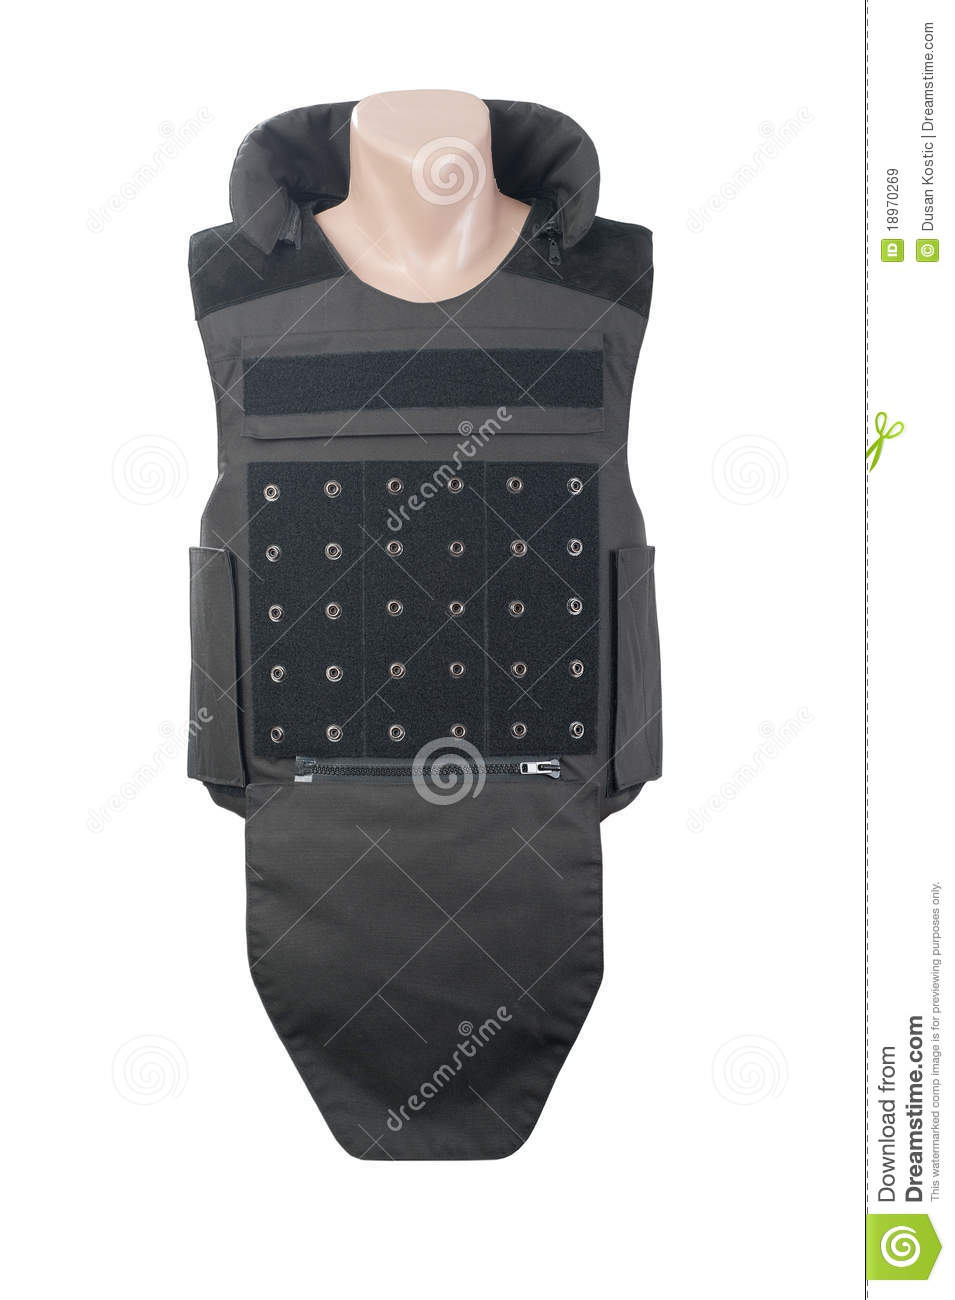 Bulletproof Vest Isolated Royalty Free Stock Images   Image  18970269